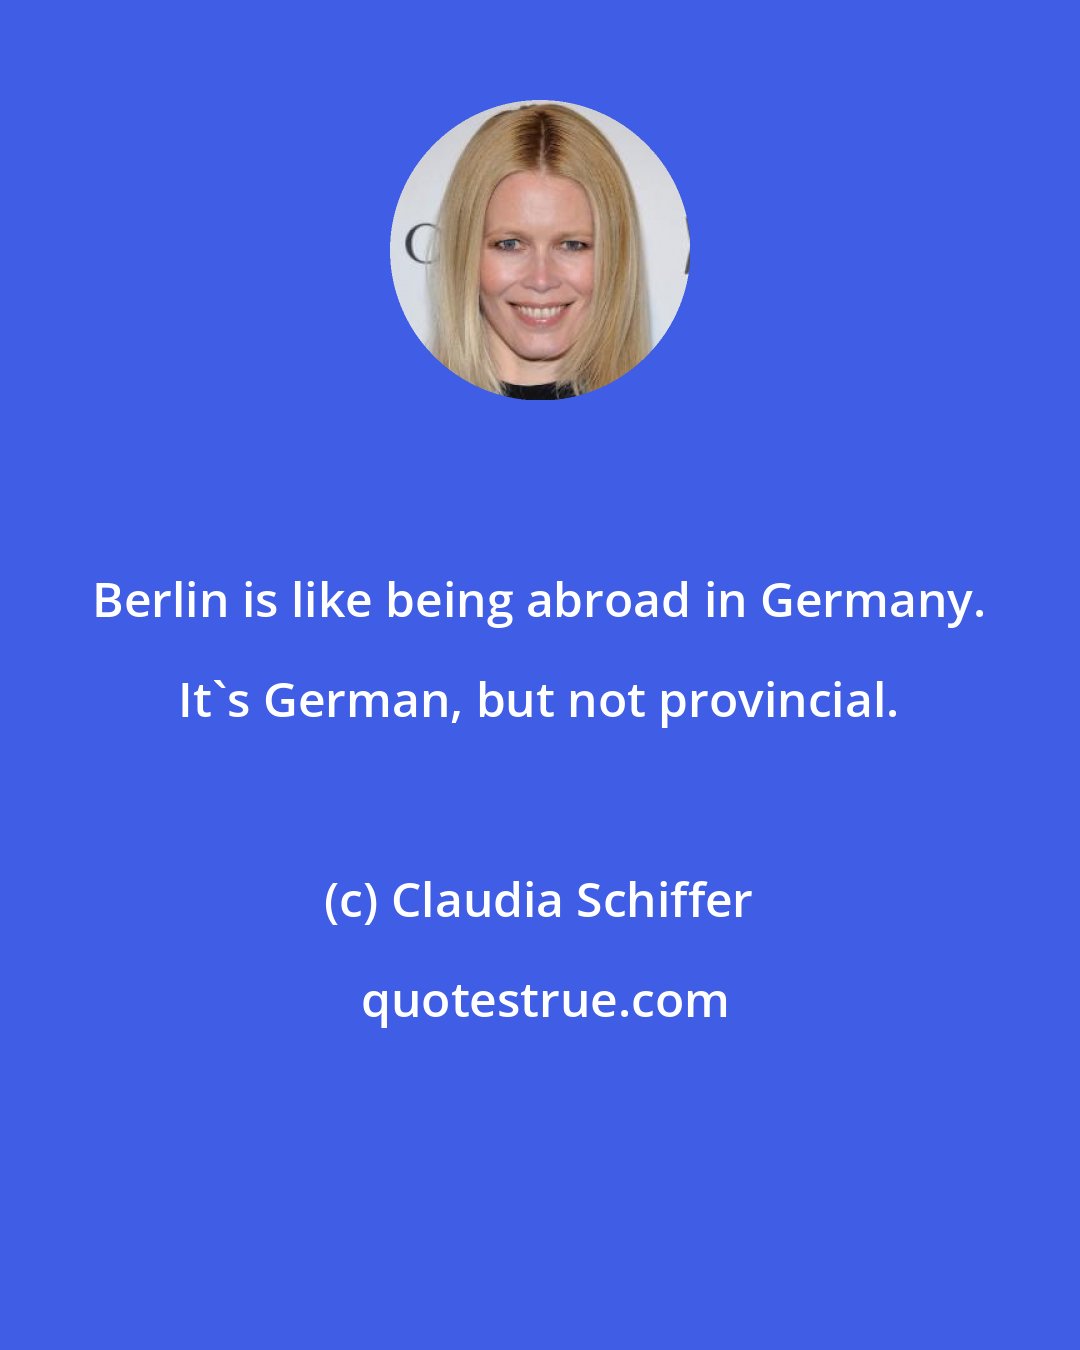 Claudia Schiffer: Berlin is like being abroad in Germany. It's German, but not provincial.